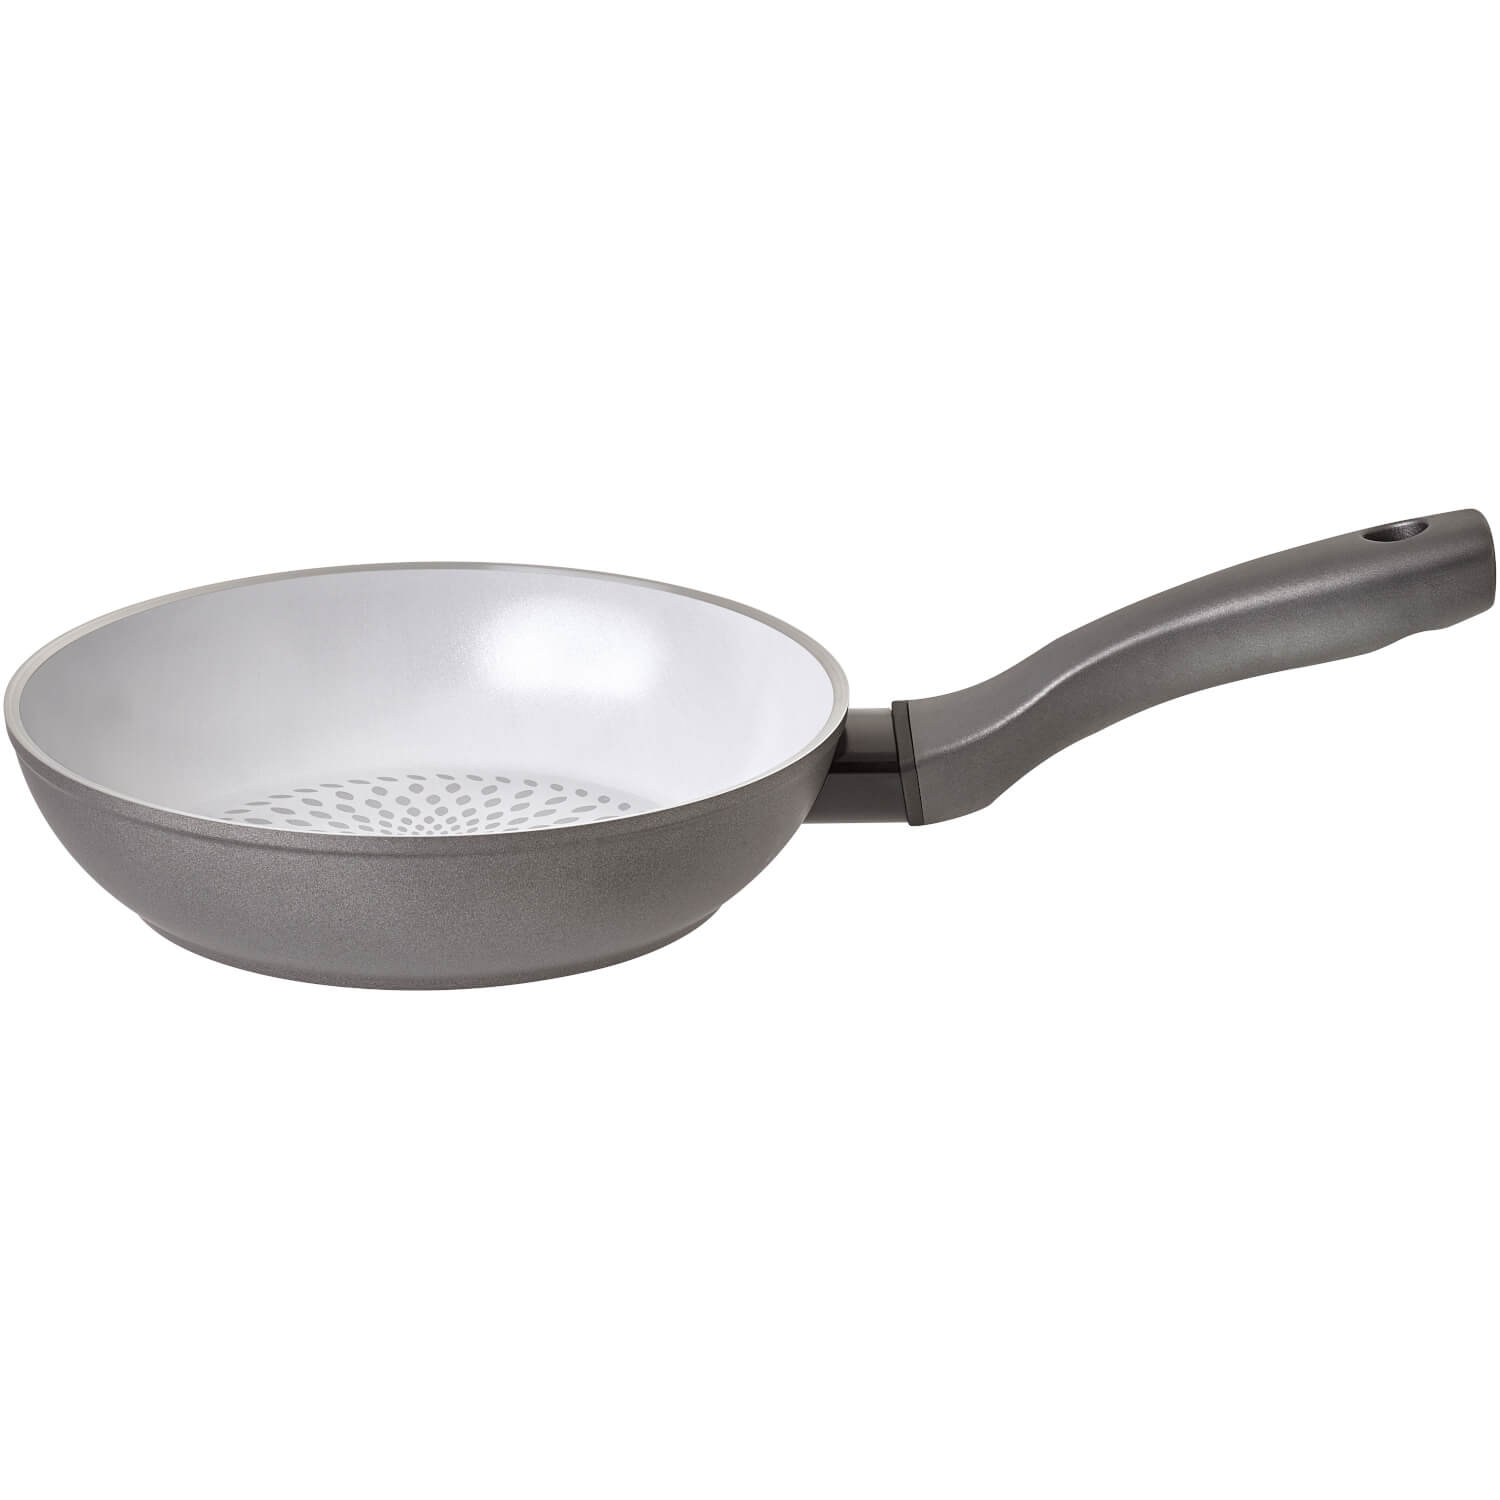 Meyers Earth Pan Frypan - 28cm 1 Shaws Department Stores